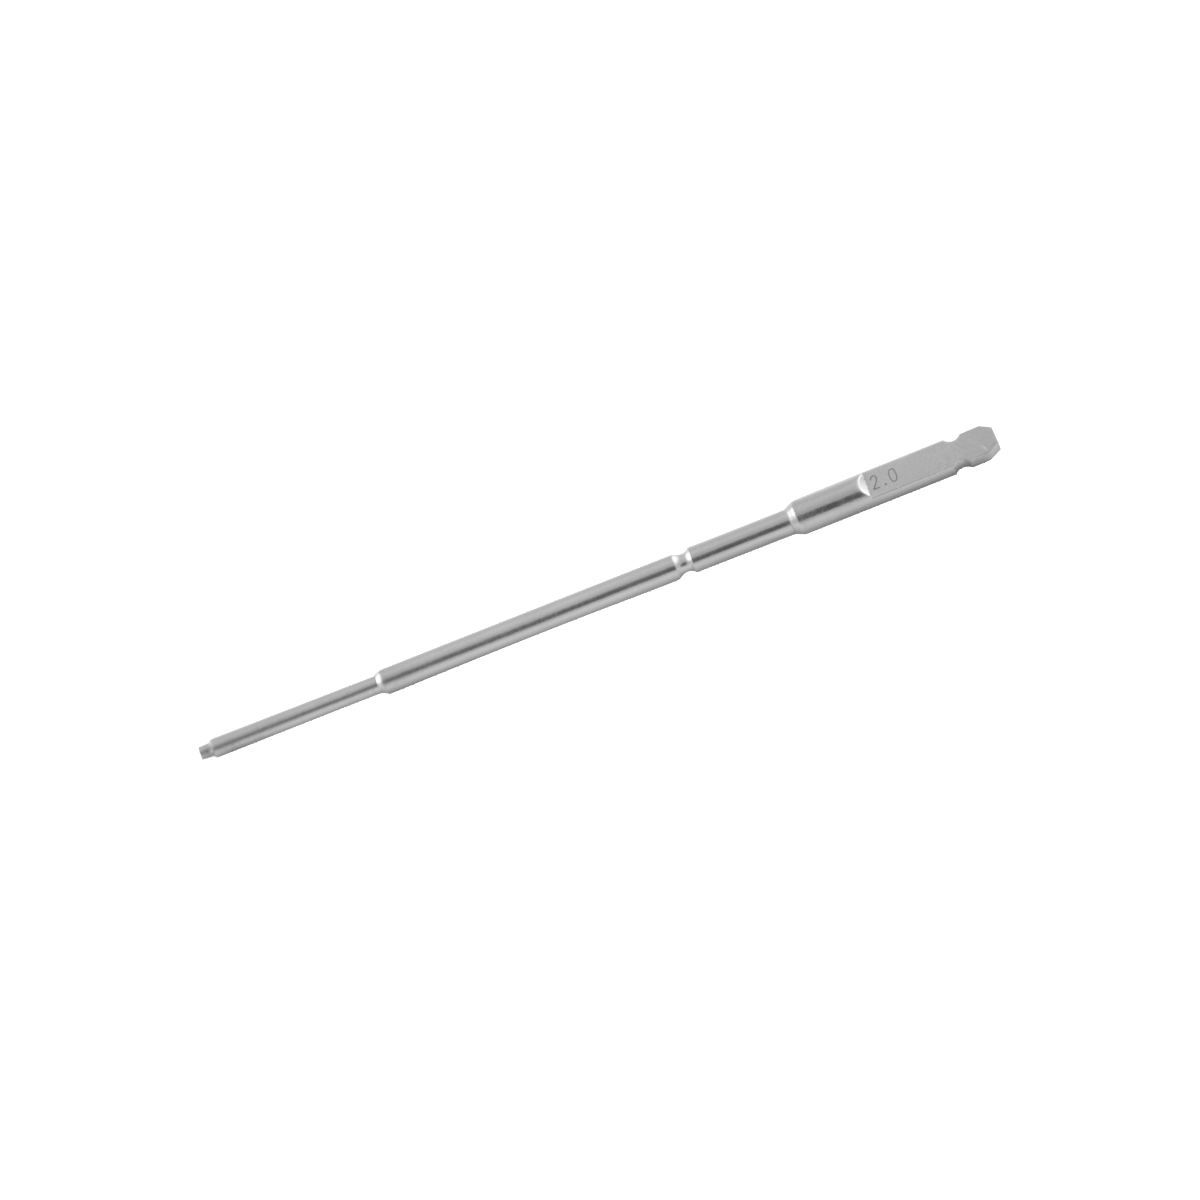 Screw Driver Q.C. End Star Drive For 2.0 MM Screw, Length 105 MM